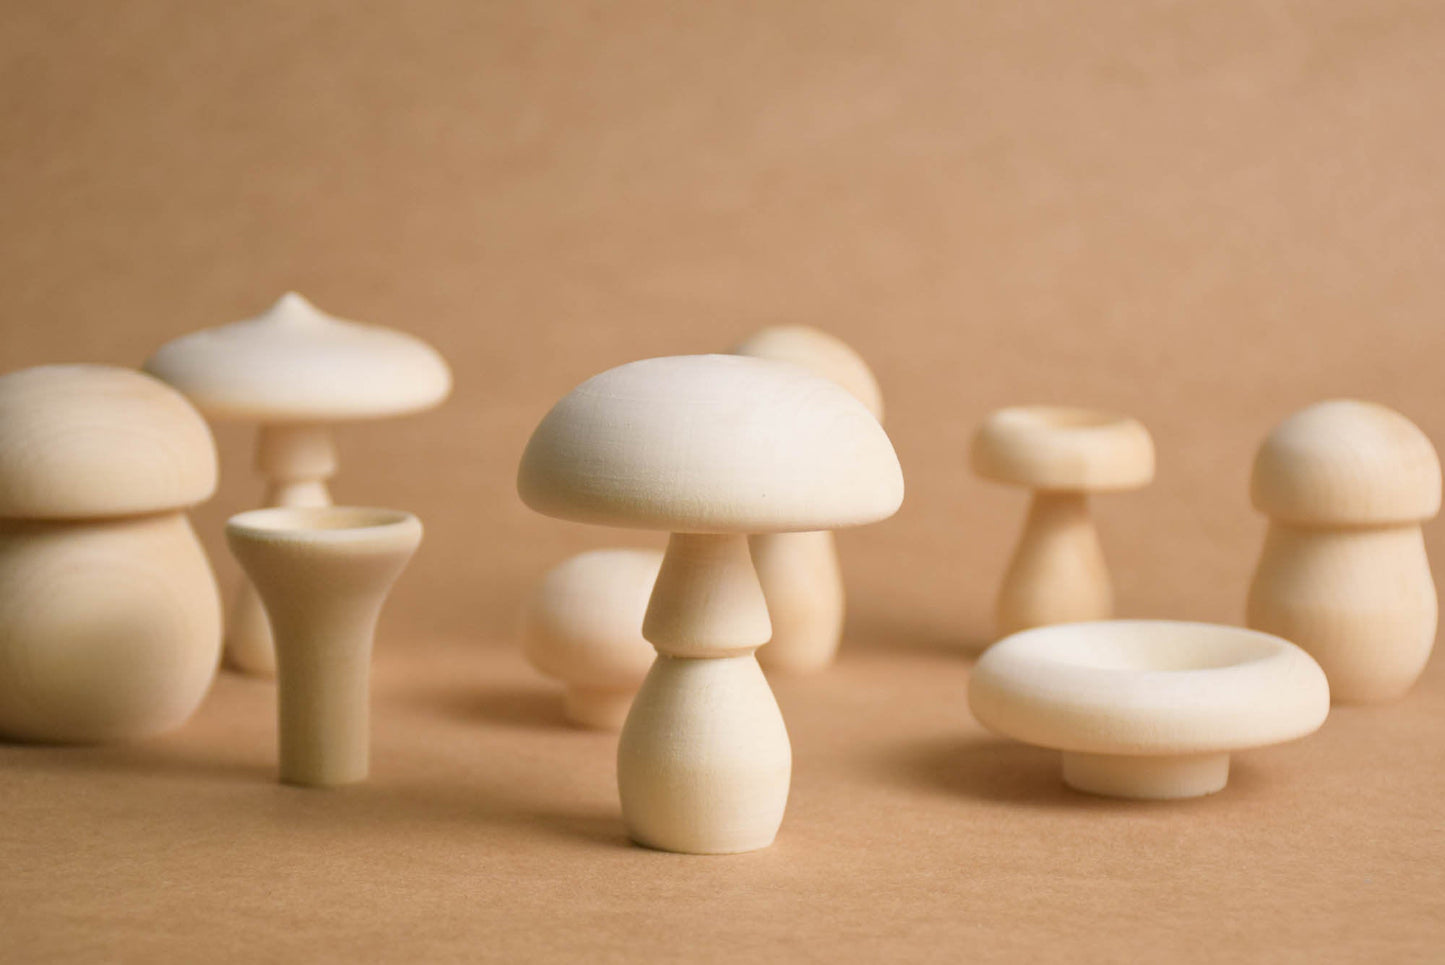 Wooden Miniature Mushroom Unfinished Set for Fairy Garden or Baby Nursery Decor, Montessori Baby, Waldorf Toys for Toddlers, Gift for Kids